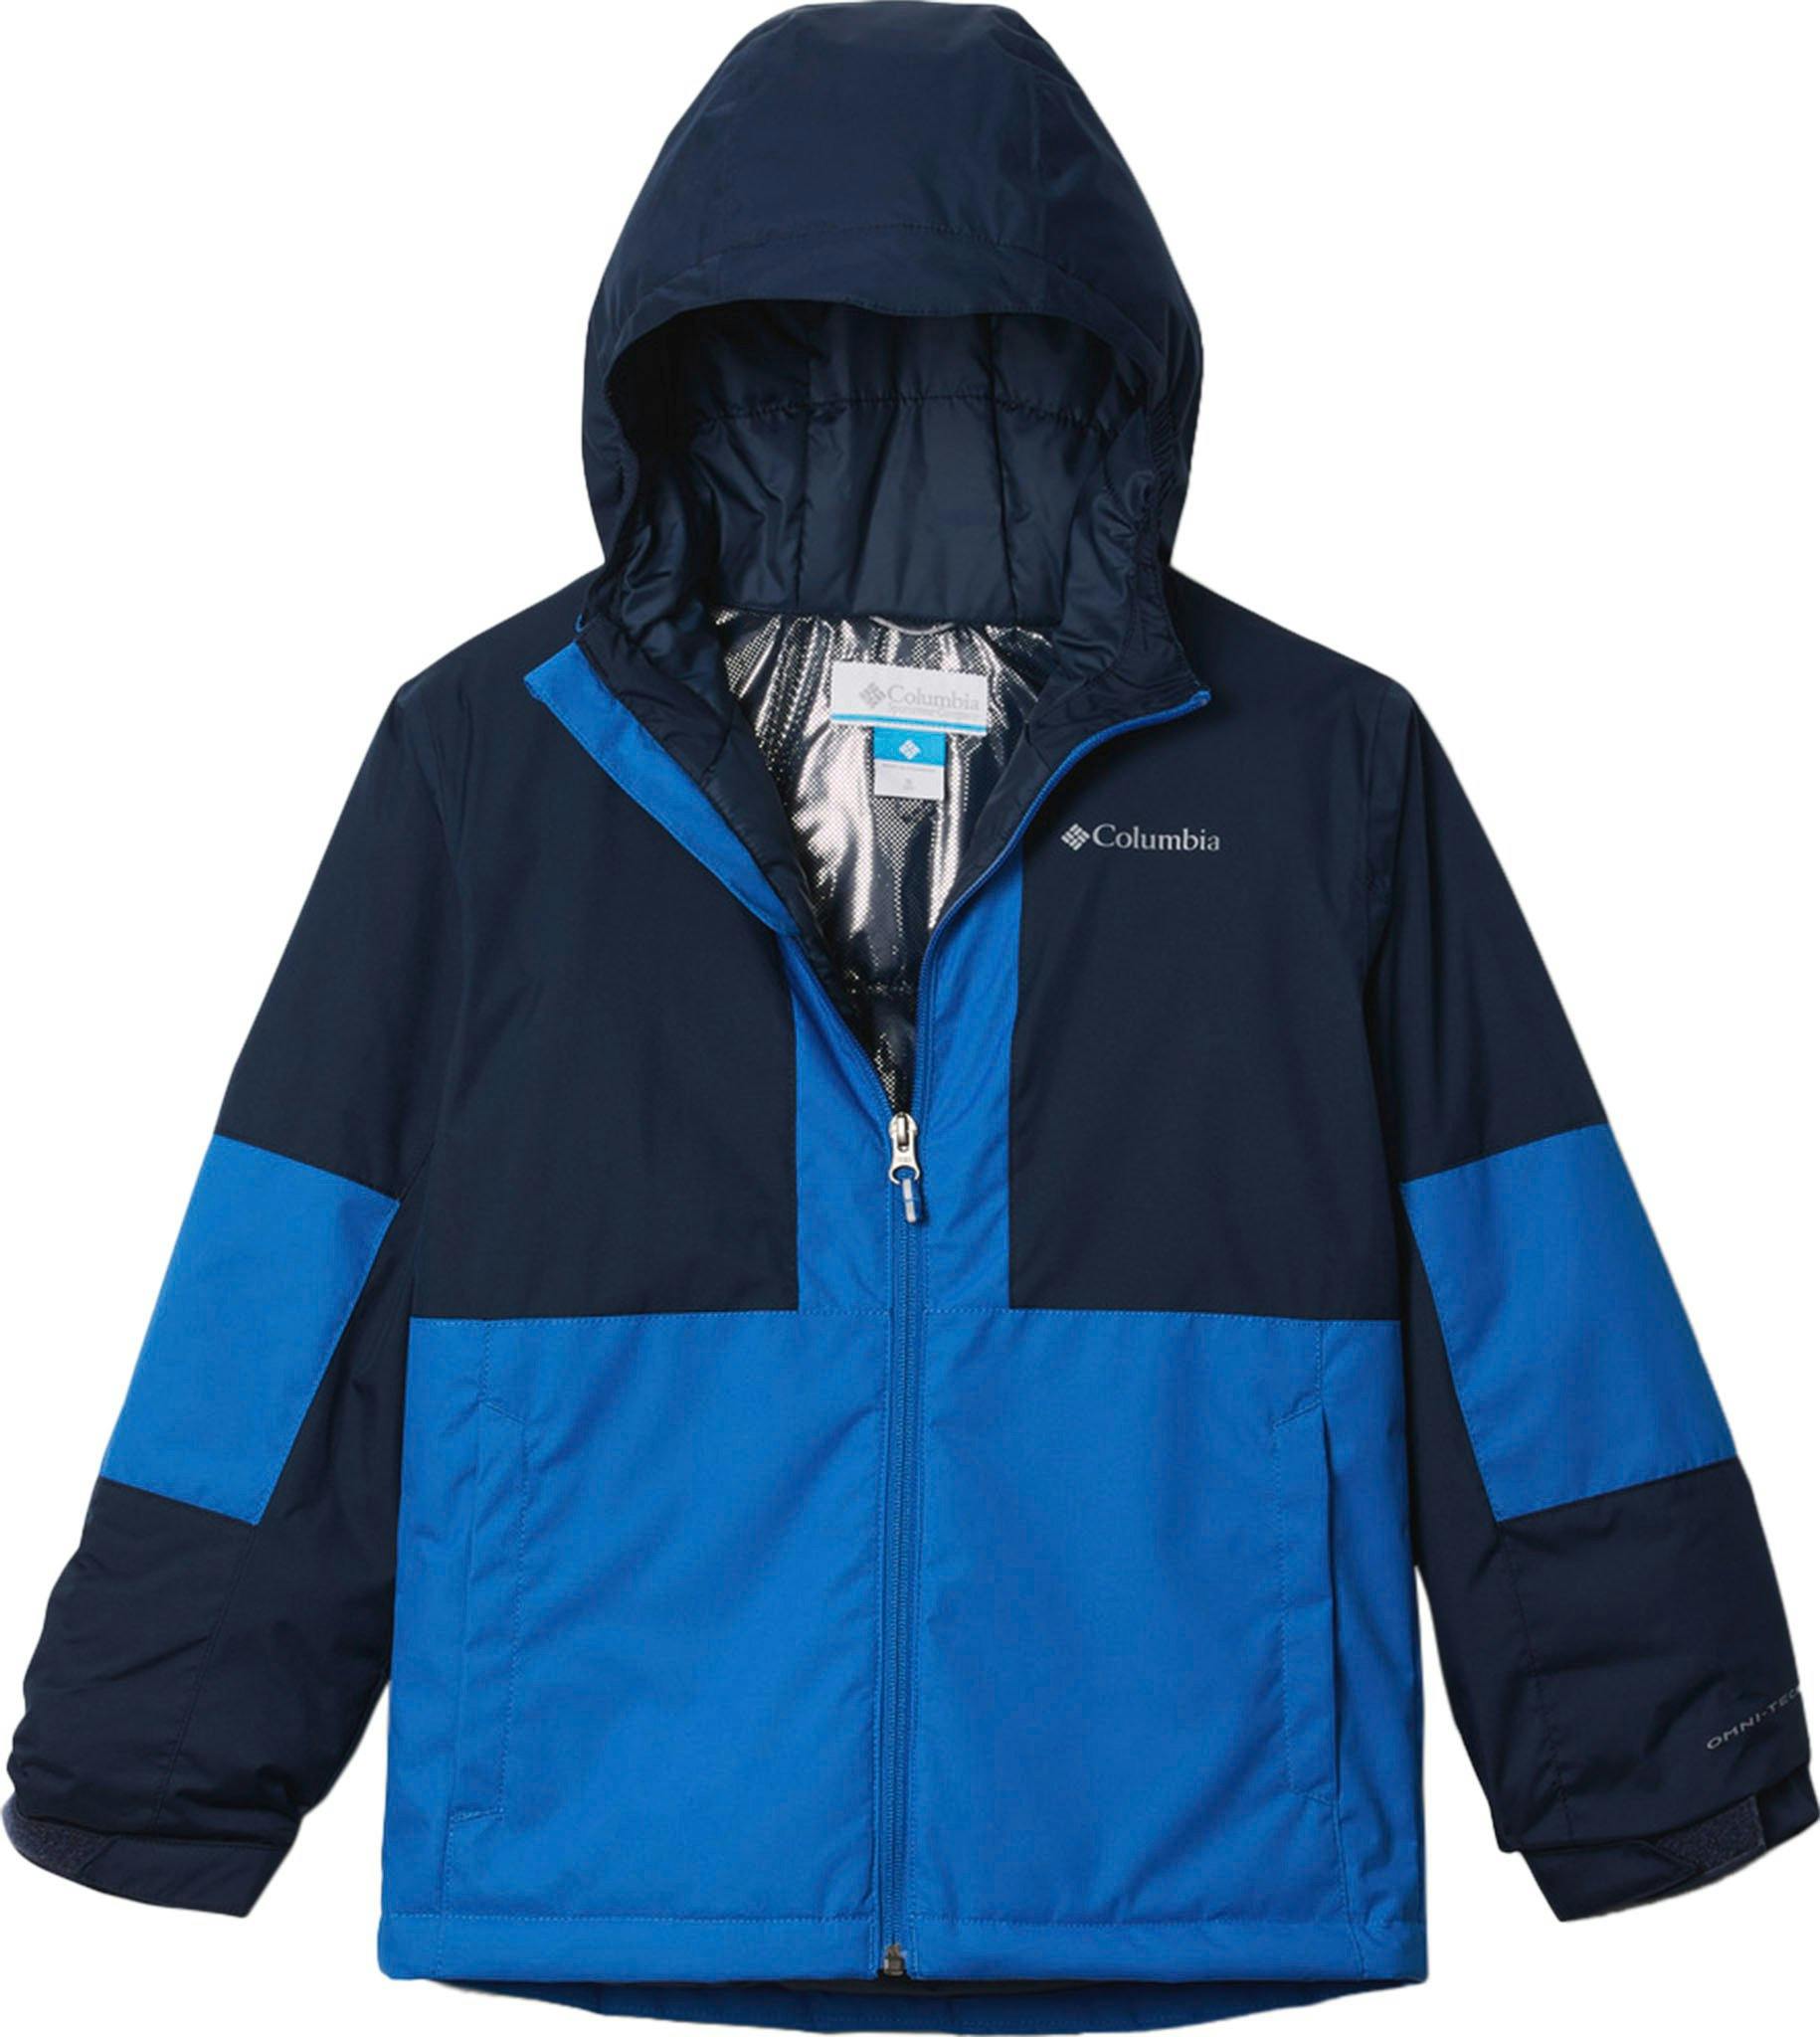 Product image for Oso Mountain Insulated Jacket - Boys